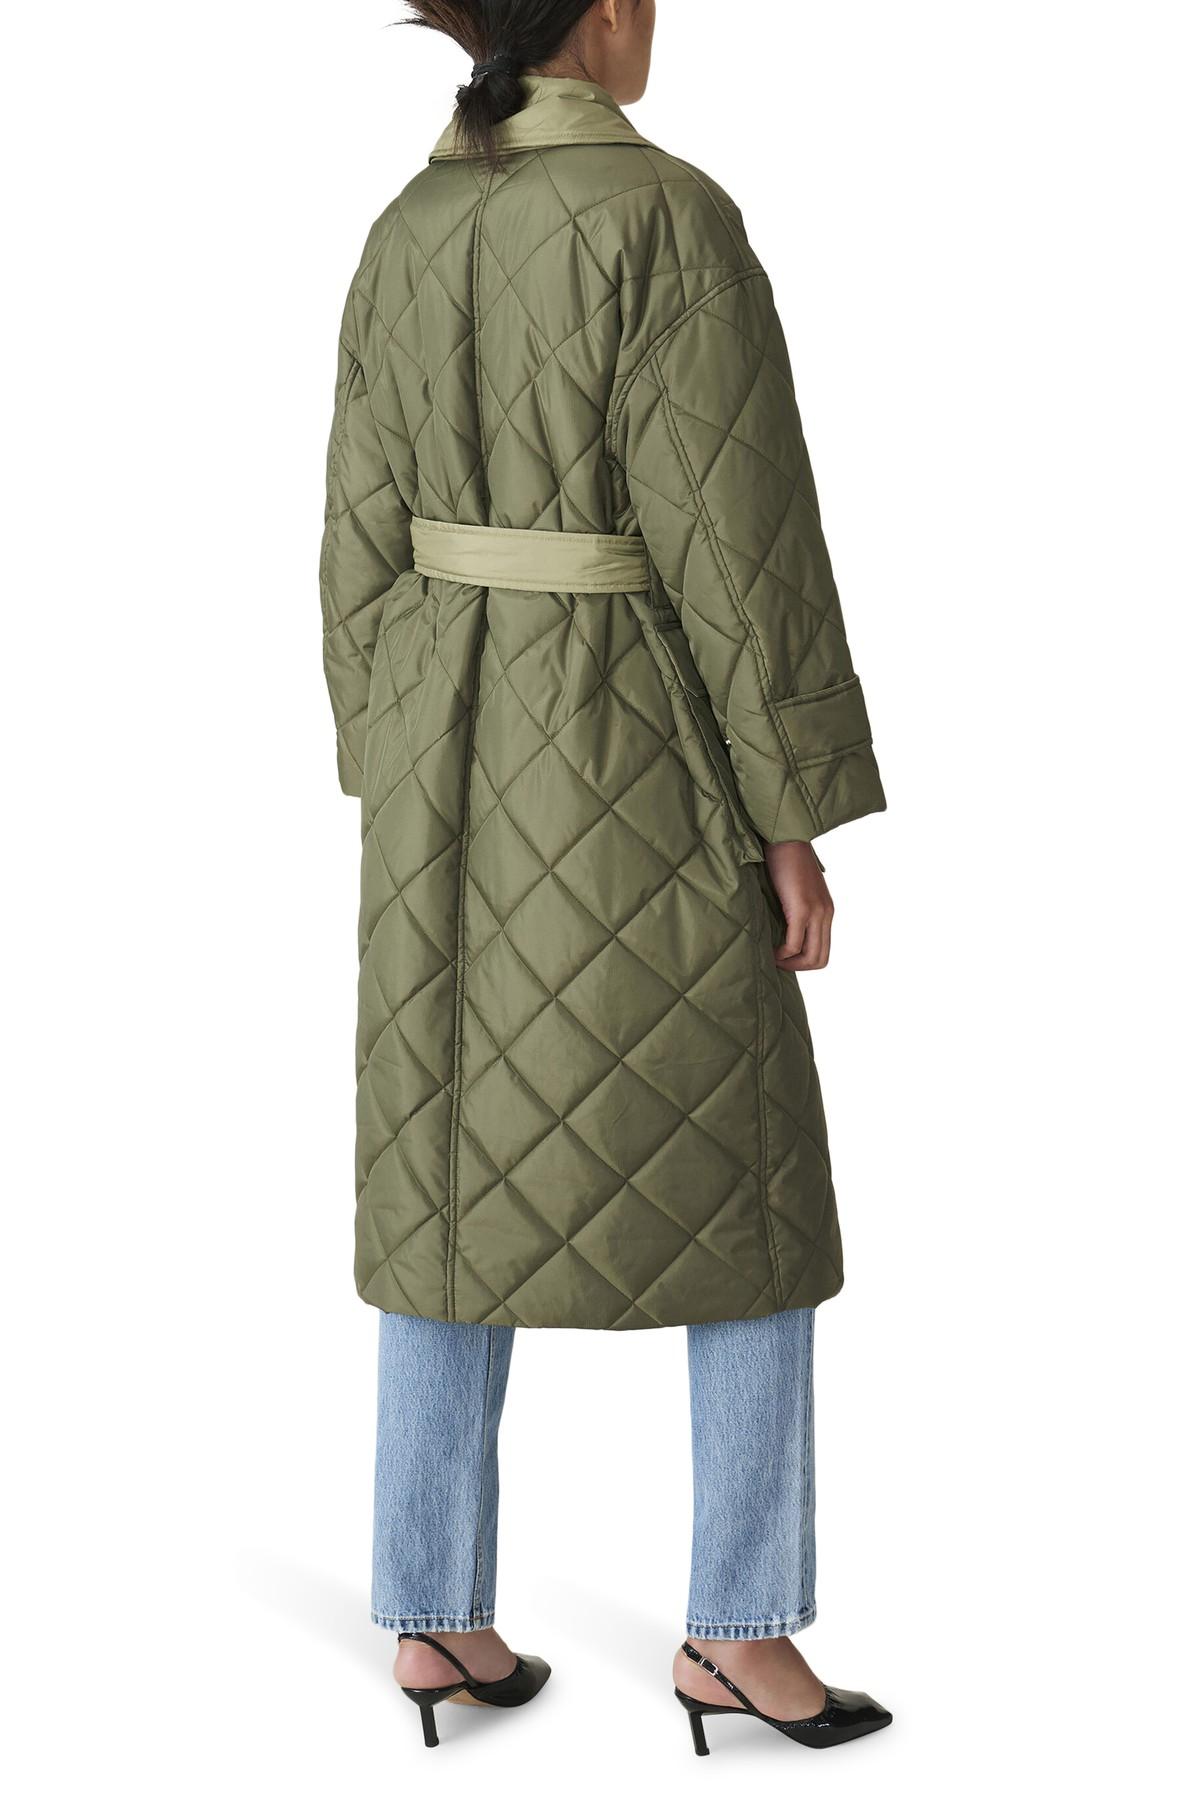 Ganni Recycled Ripstop Quilted Coat in Green | Lyst